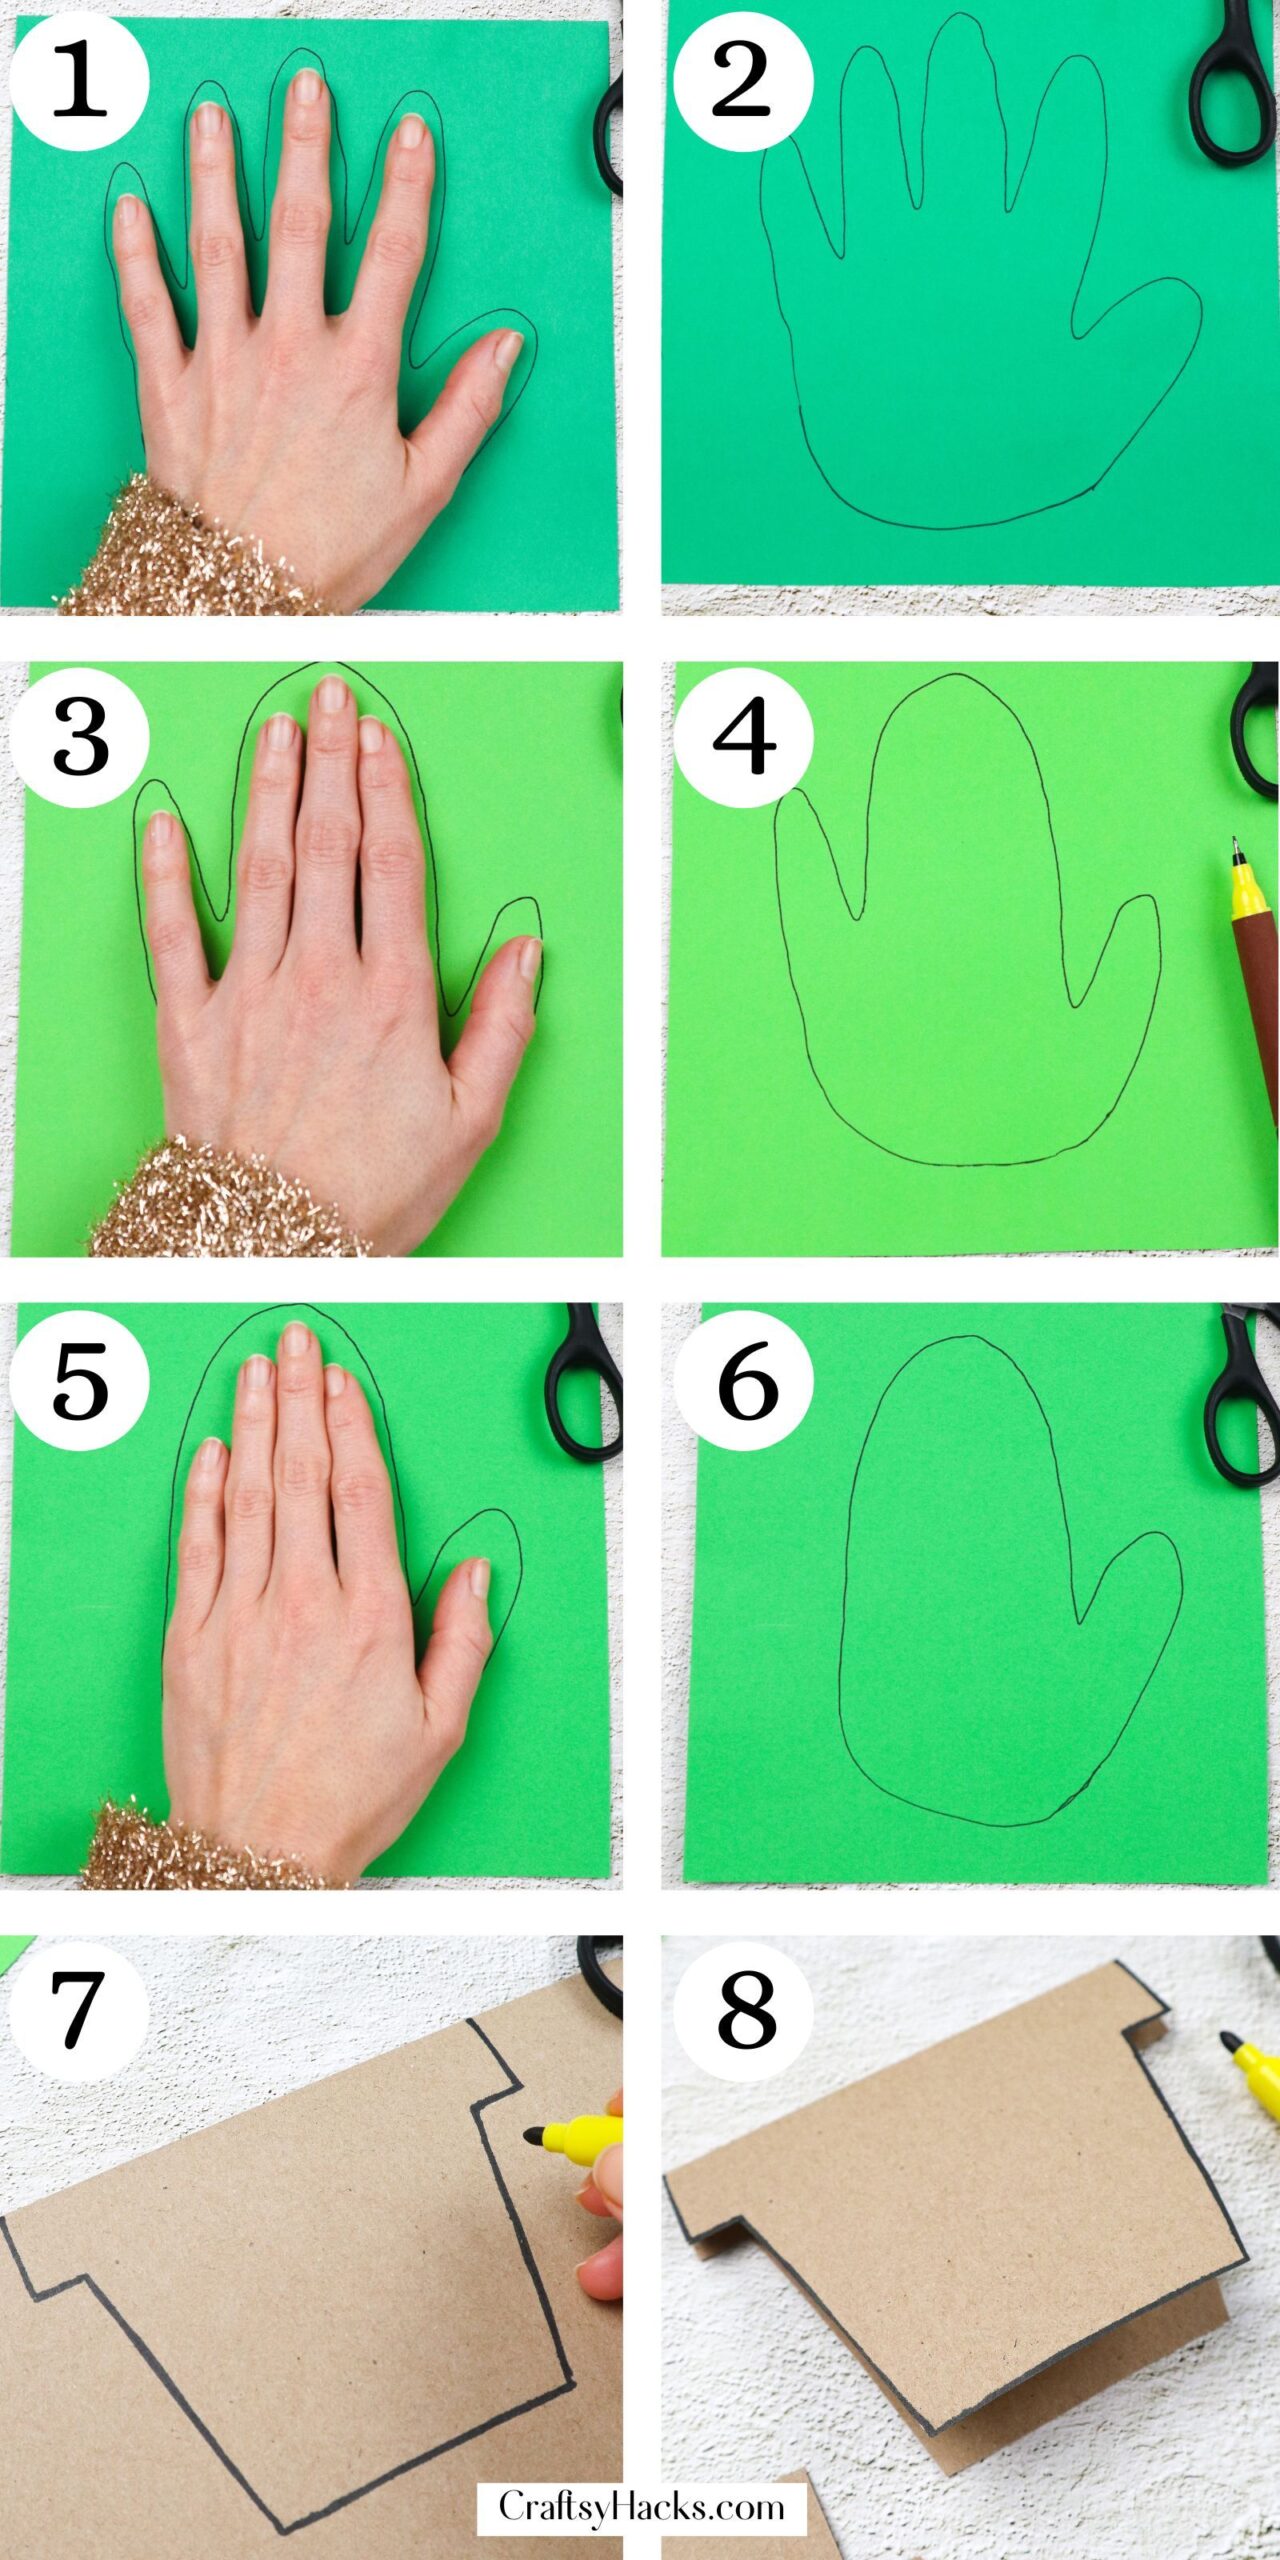 step by step instructions to make a DIY Handprint Cactus